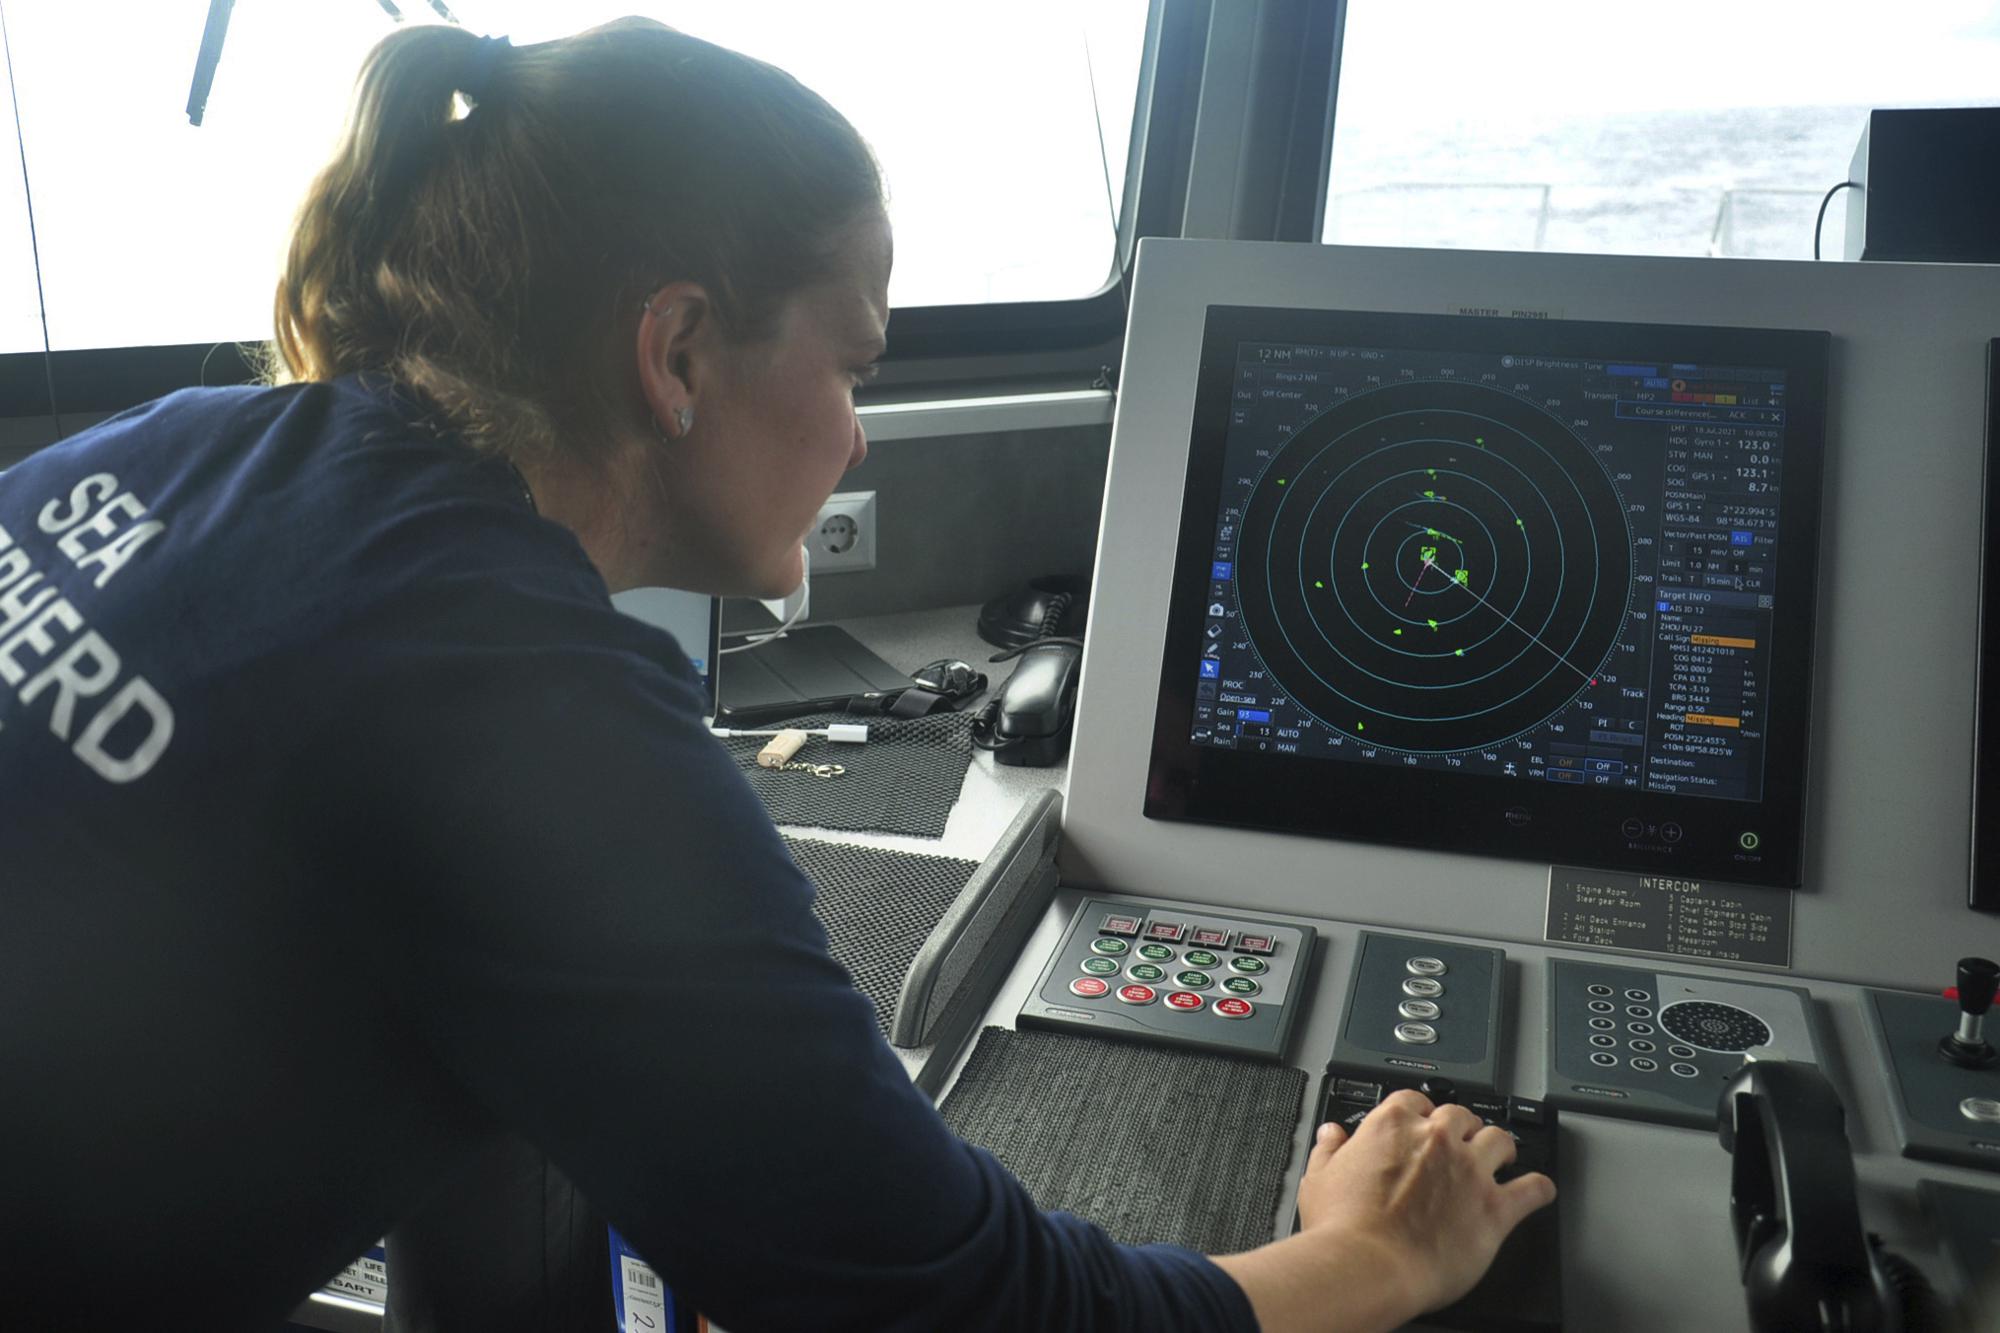 Carmen McGregor, second officer of the Ocean Warrior, checks the radar system on July 18, 2021, as part of the ship’s 18-day voyage to observe up close the activities of the Chinese distant water fishing fleet off the west coast of South America. (AP Photo/Joshua Goodman)